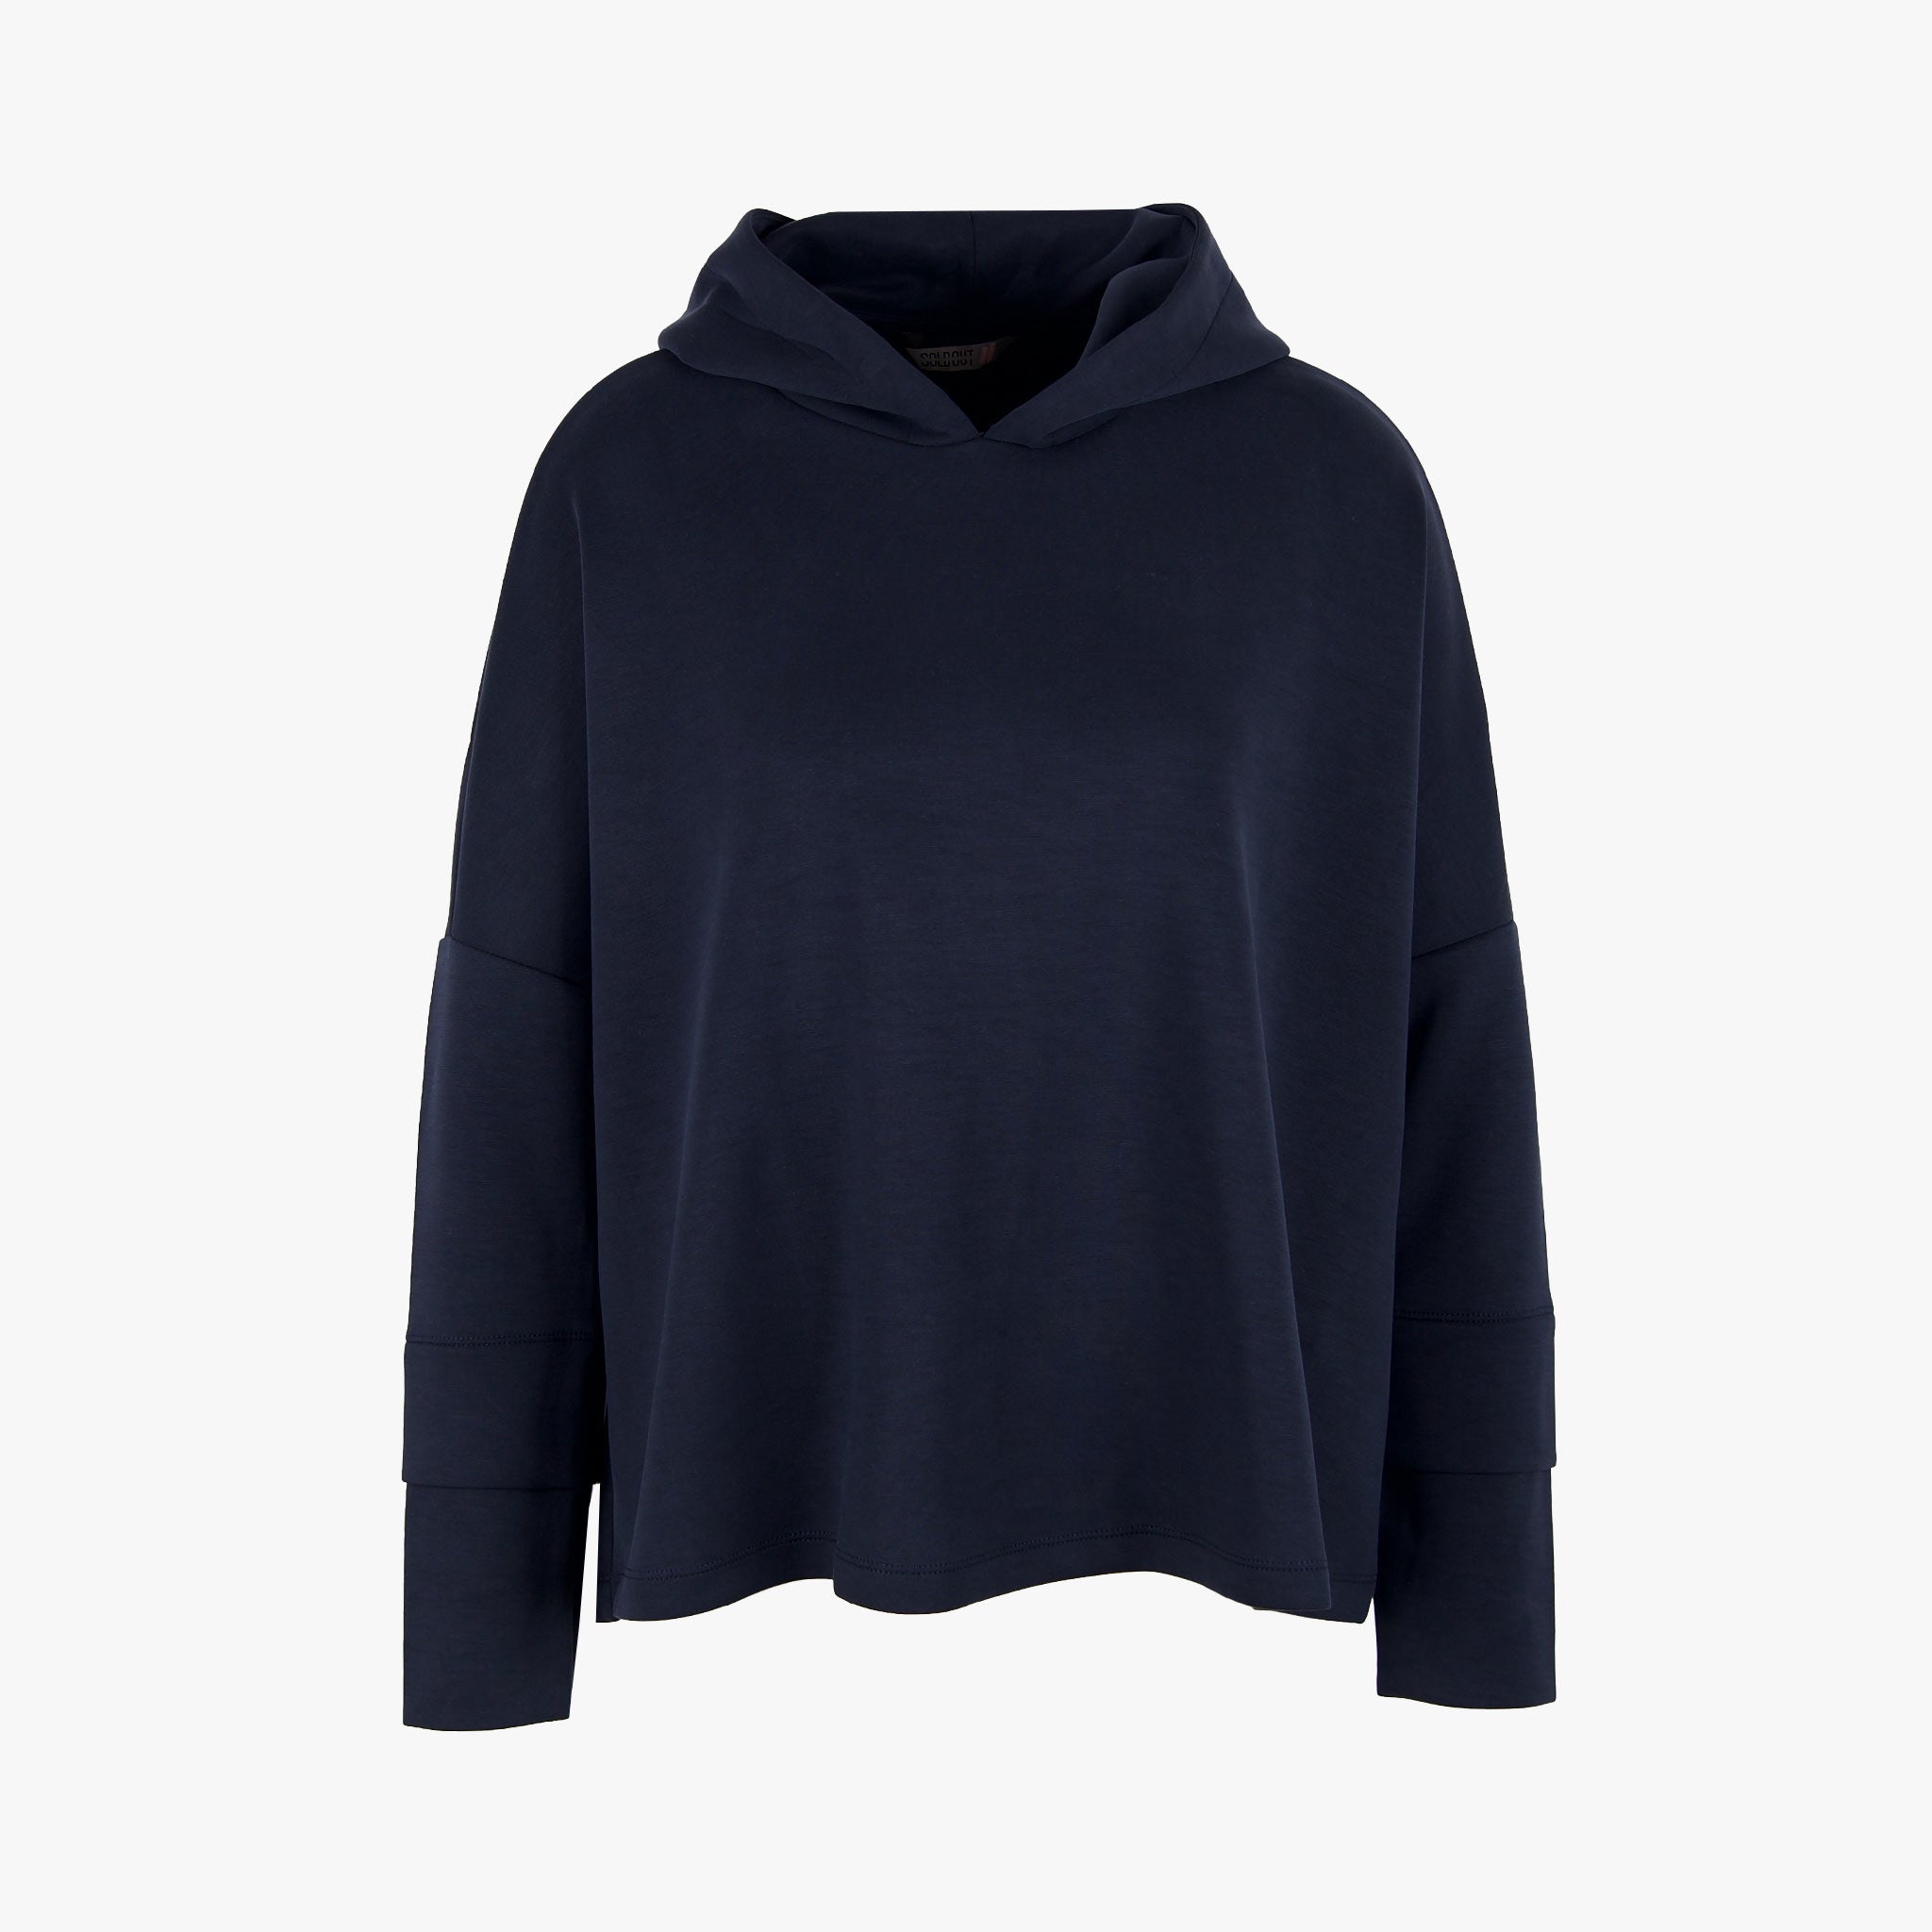 Sold out Hoodie | navy